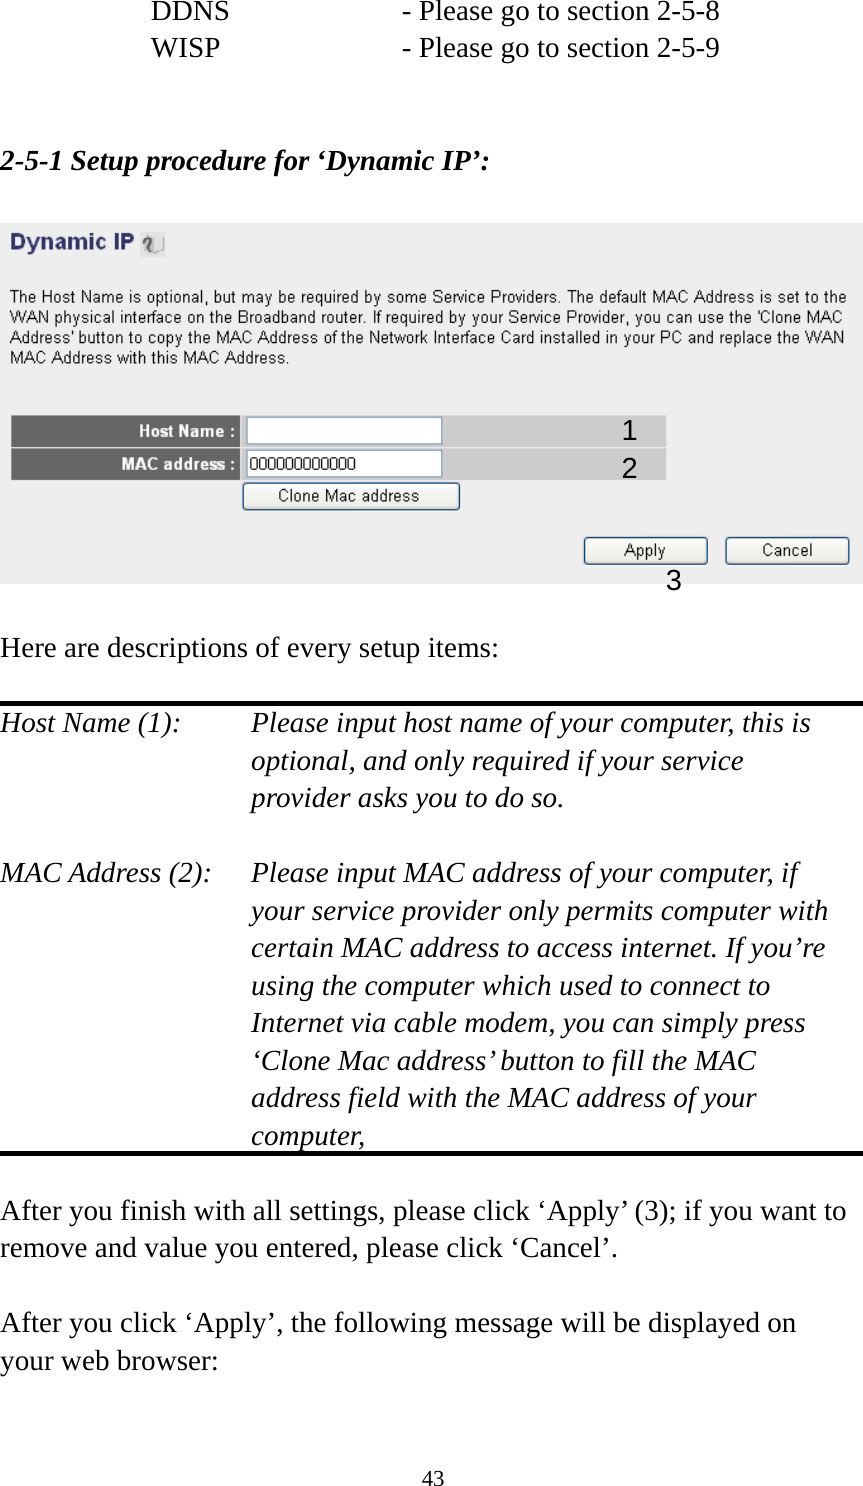 43 DDNS        - Please go to section 2-5-8 WISP        - Please go to section 2-5-9   2-5-1 Setup procedure for ‘Dynamic IP’:    Here are descriptions of every setup items:  Host Name (1):    Please input host name of your computer, this is optional, and only required if your service provider asks you to do so.    MAC Address (2):    Please input MAC address of your computer, if your service provider only permits computer with certain MAC address to access internet. If you’re using the computer which used to connect to Internet via cable modem, you can simply press ‘Clone Mac address’ button to fill the MAC address field with the MAC address of your computer,   After you finish with all settings, please click ‘Apply’ (3); if you want to remove and value you entered, please click ‘Cancel’.  After you click ‘Apply’, the following message will be displayed on your web browser:  1 2 3 